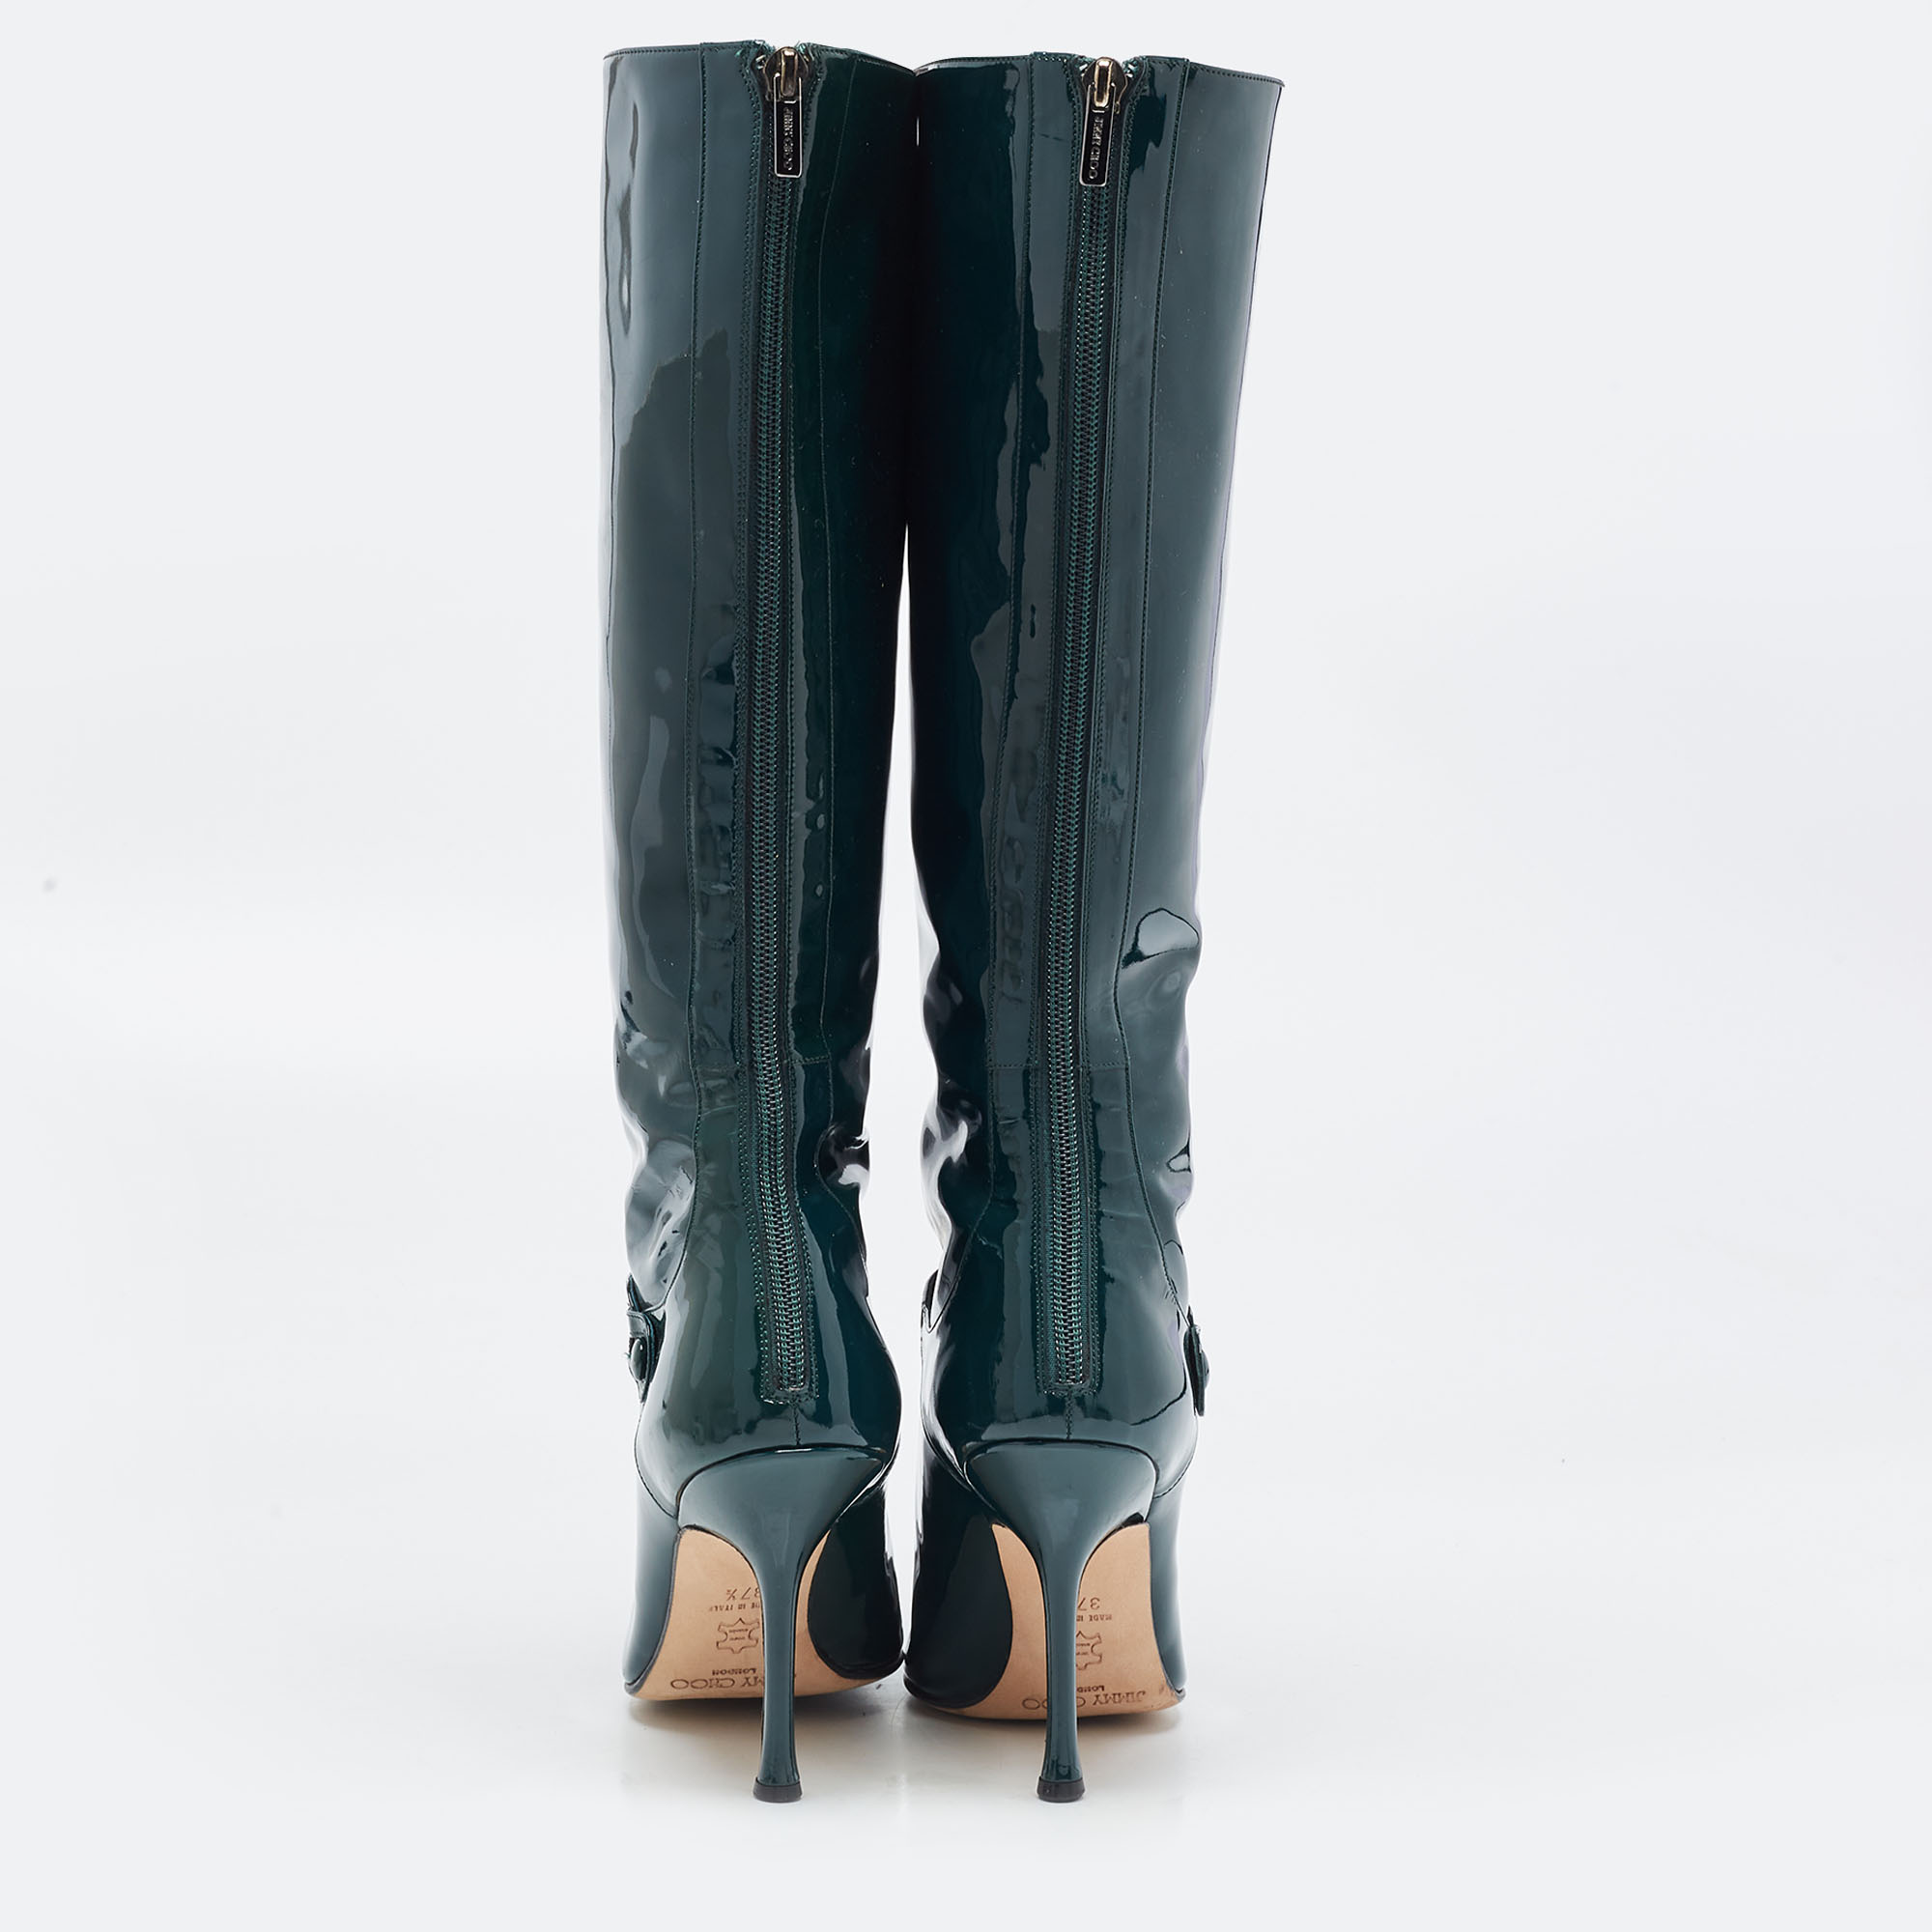 Jimmy Choo Green Patent Leather Calf Length Boots Size 37.5